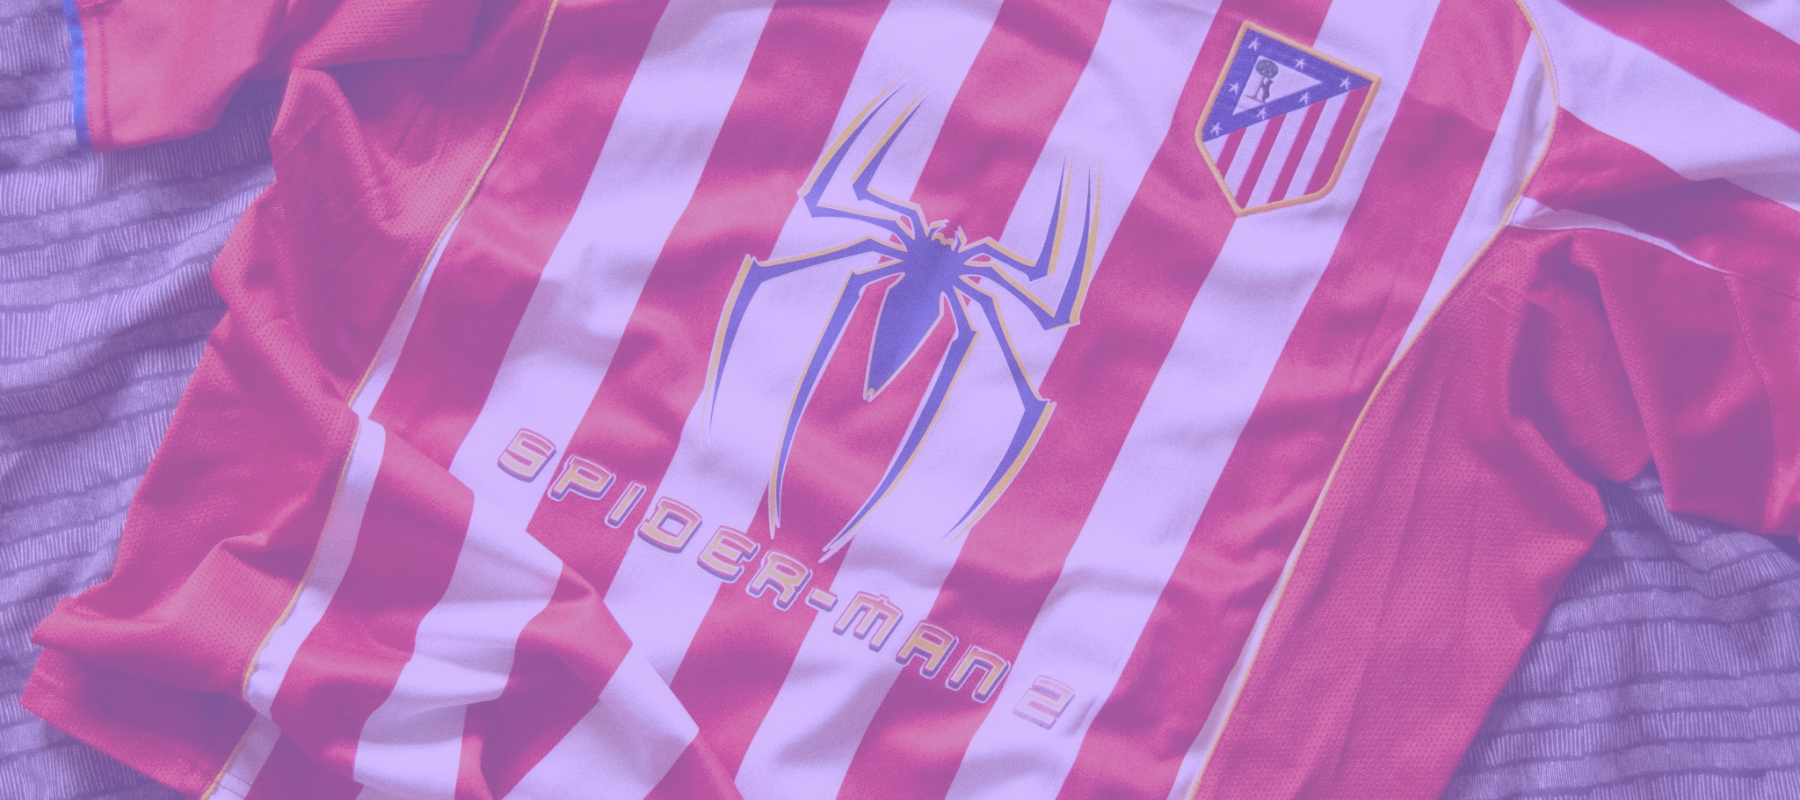 When the movies sponsored Atletico Madrid